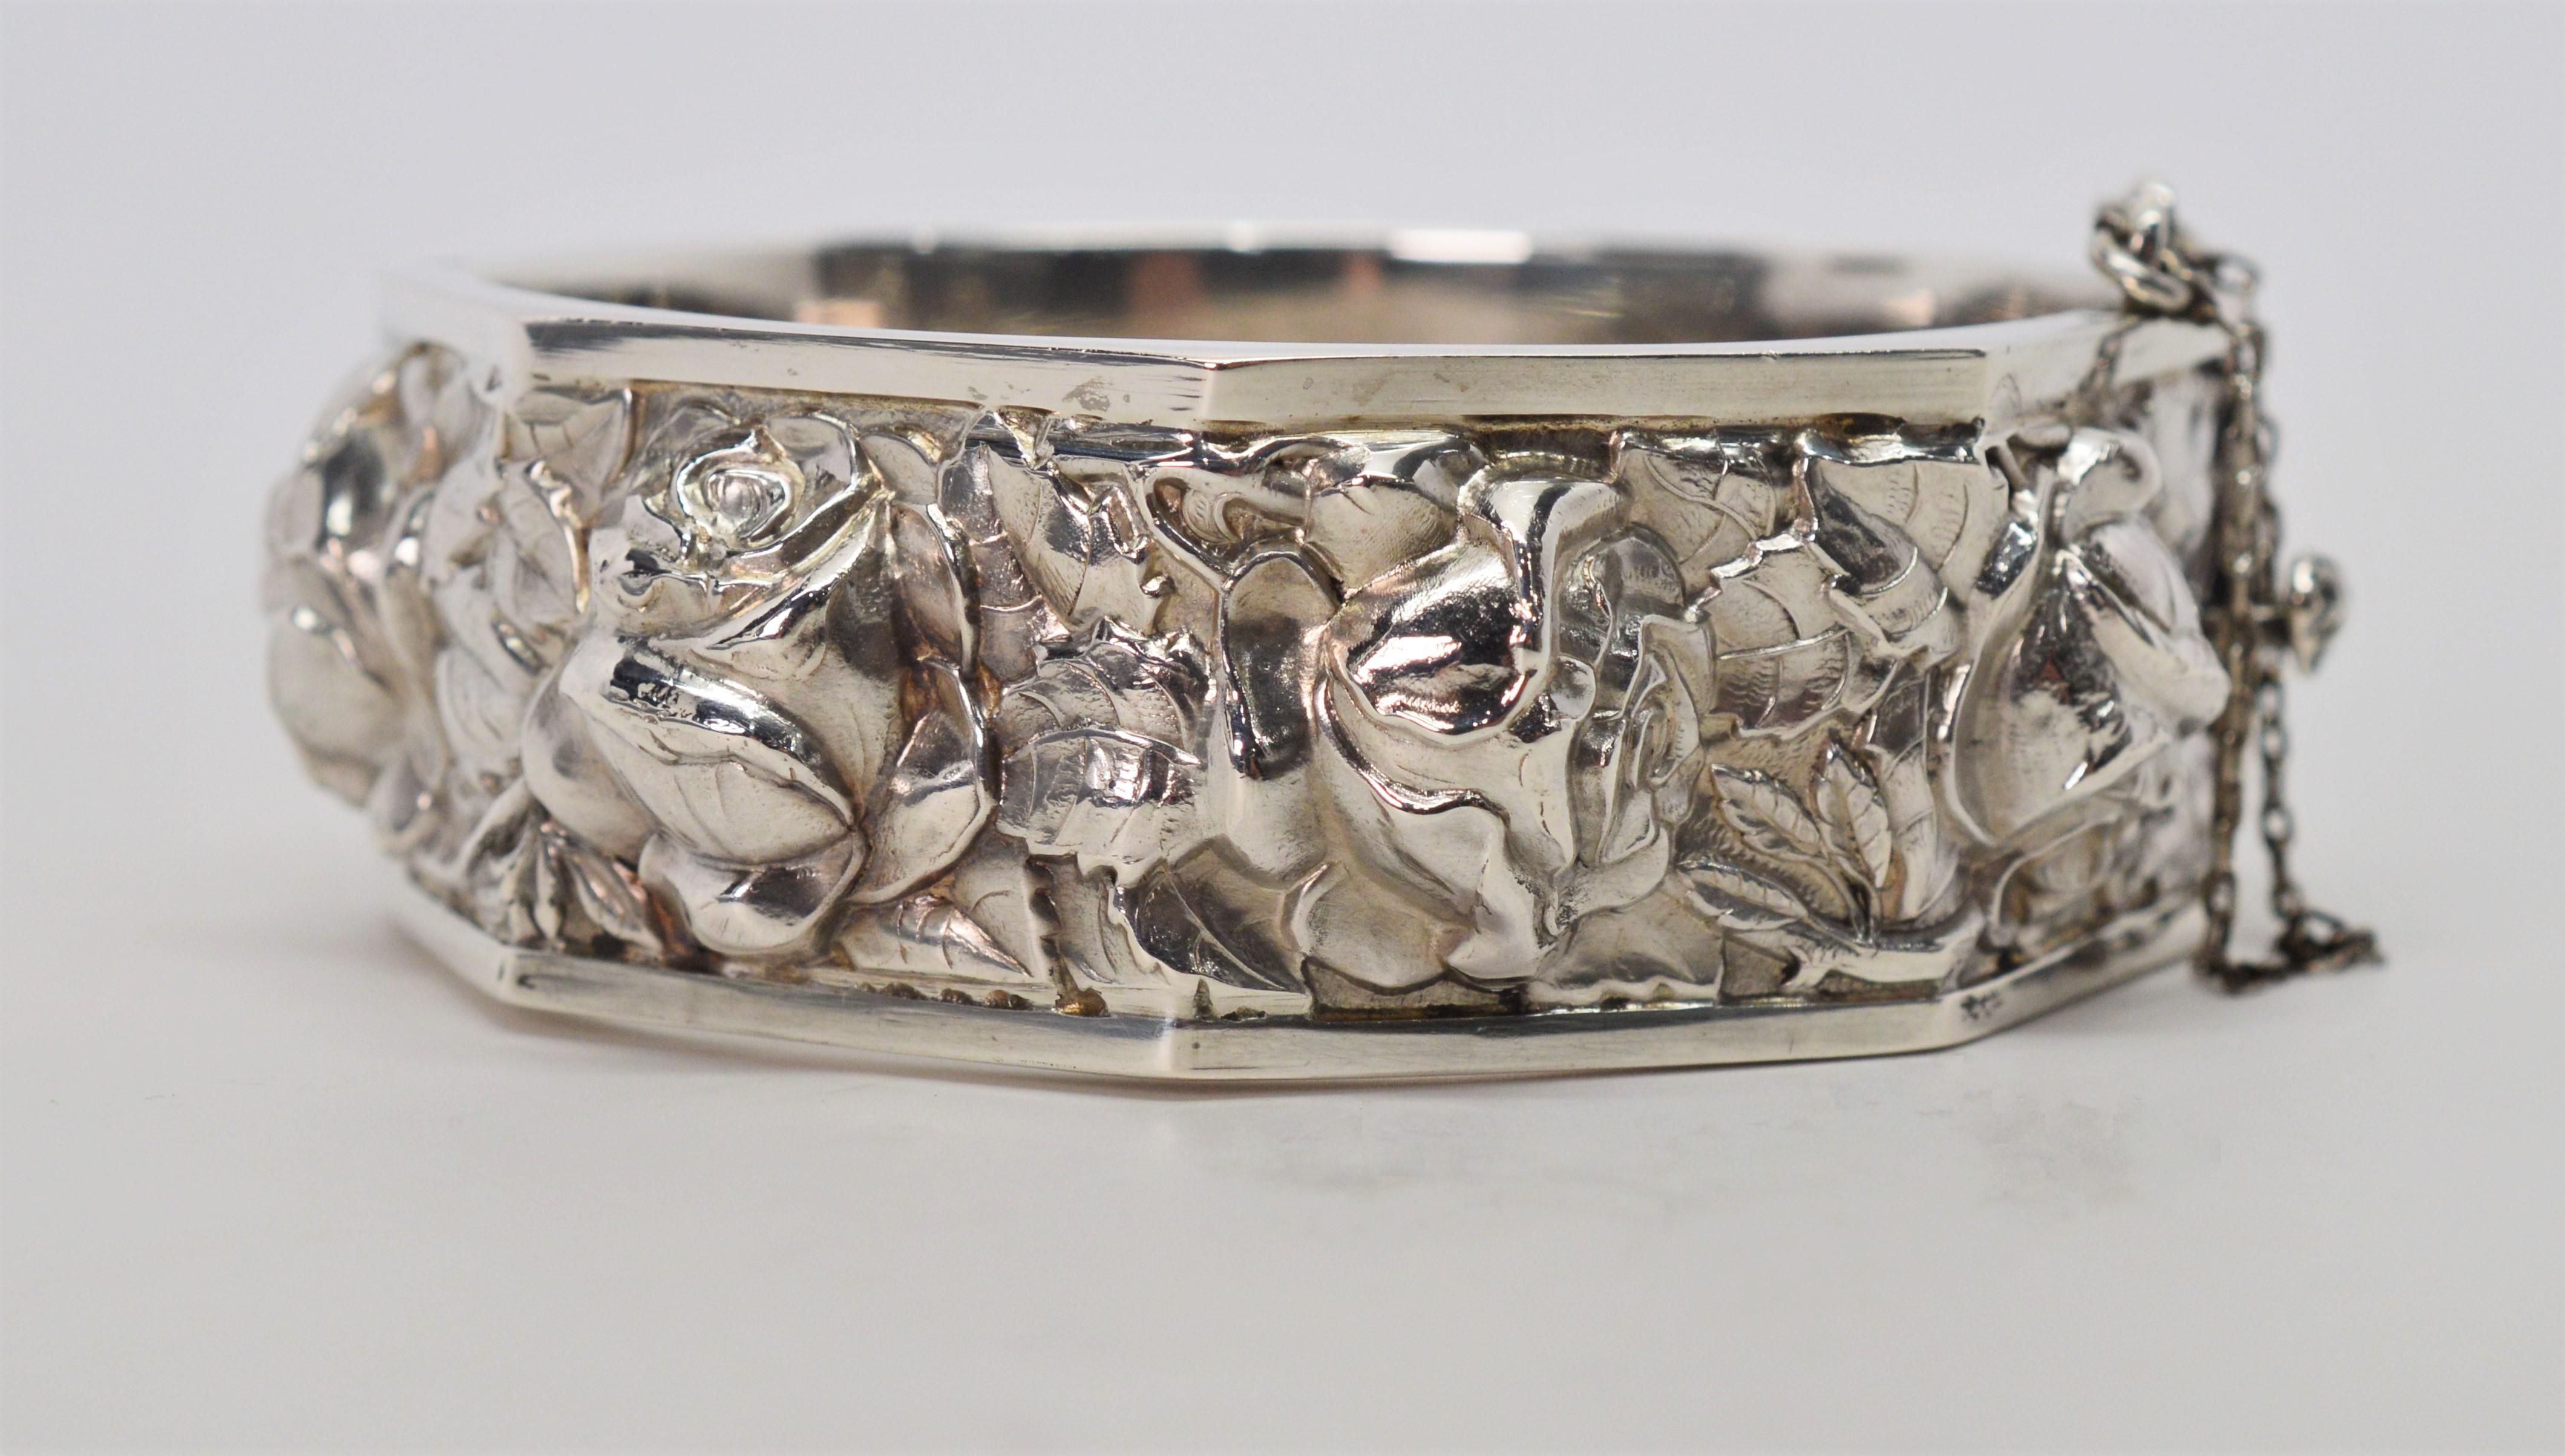 Artisan style collector's piece made with high relief, this German silver bangle bracelet has a raised three dimensional floral design around its full length. Roaring twenties and still in superb condition. Structured in an octagonal shape, the rims